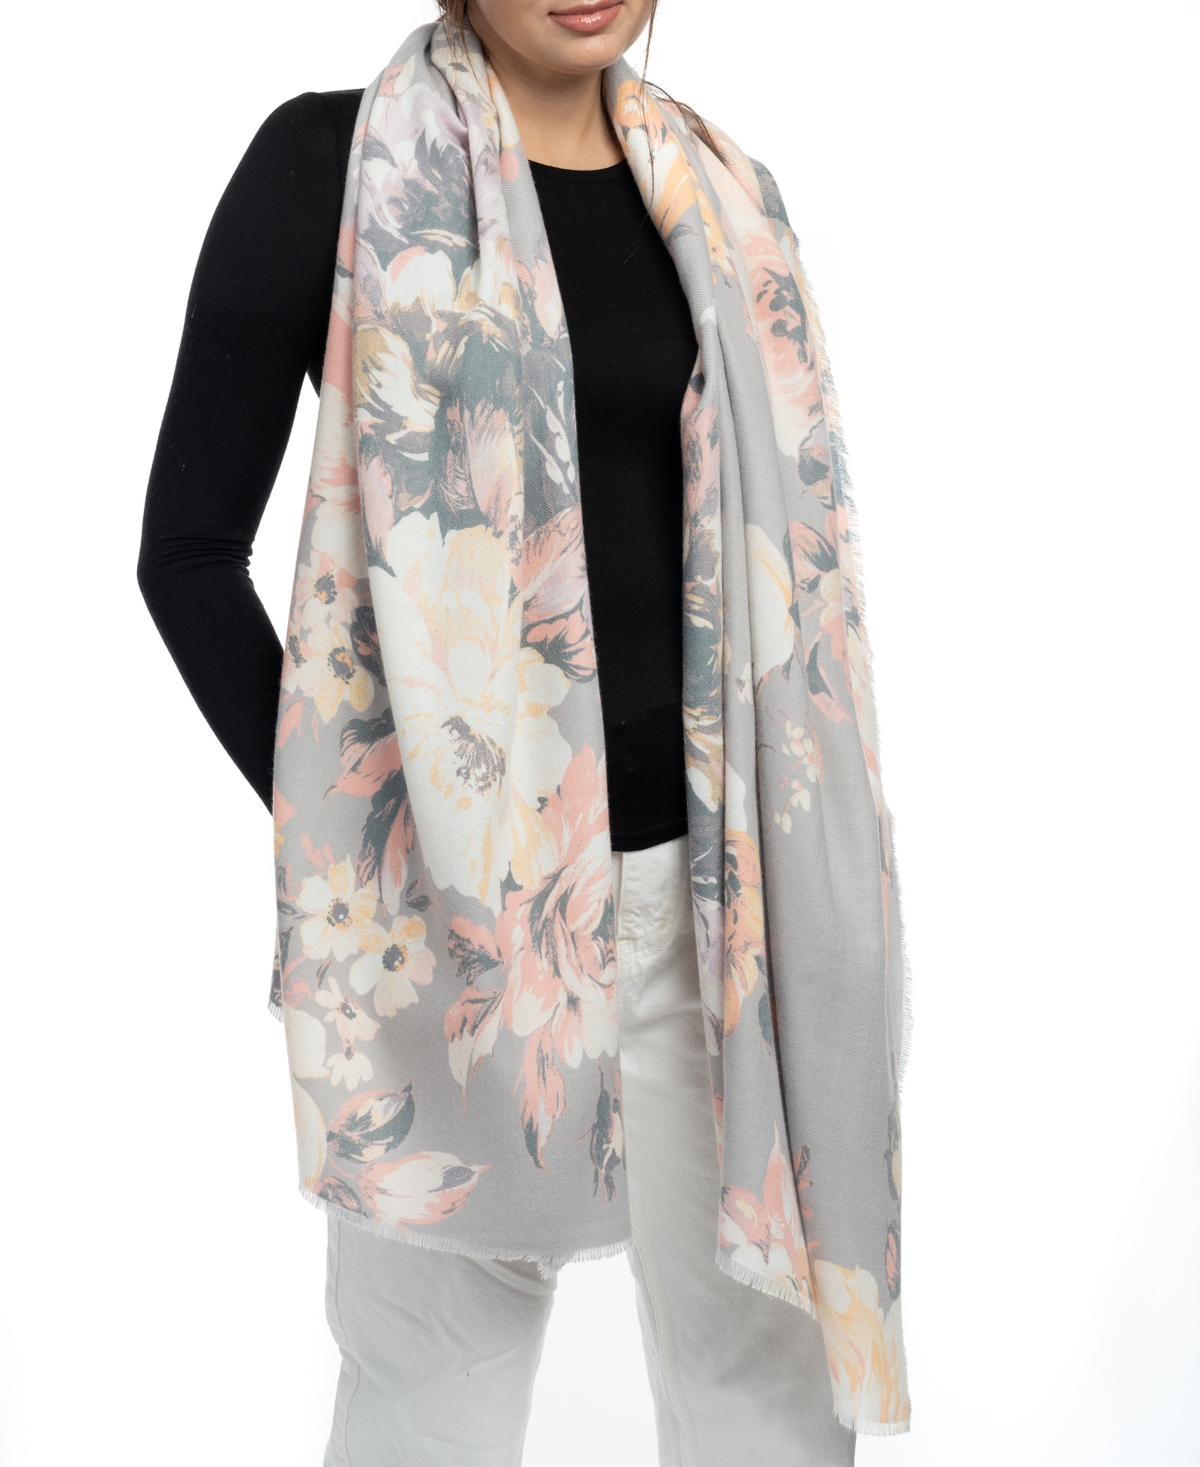 Fall Blooms Super Soft Scarf - Gray